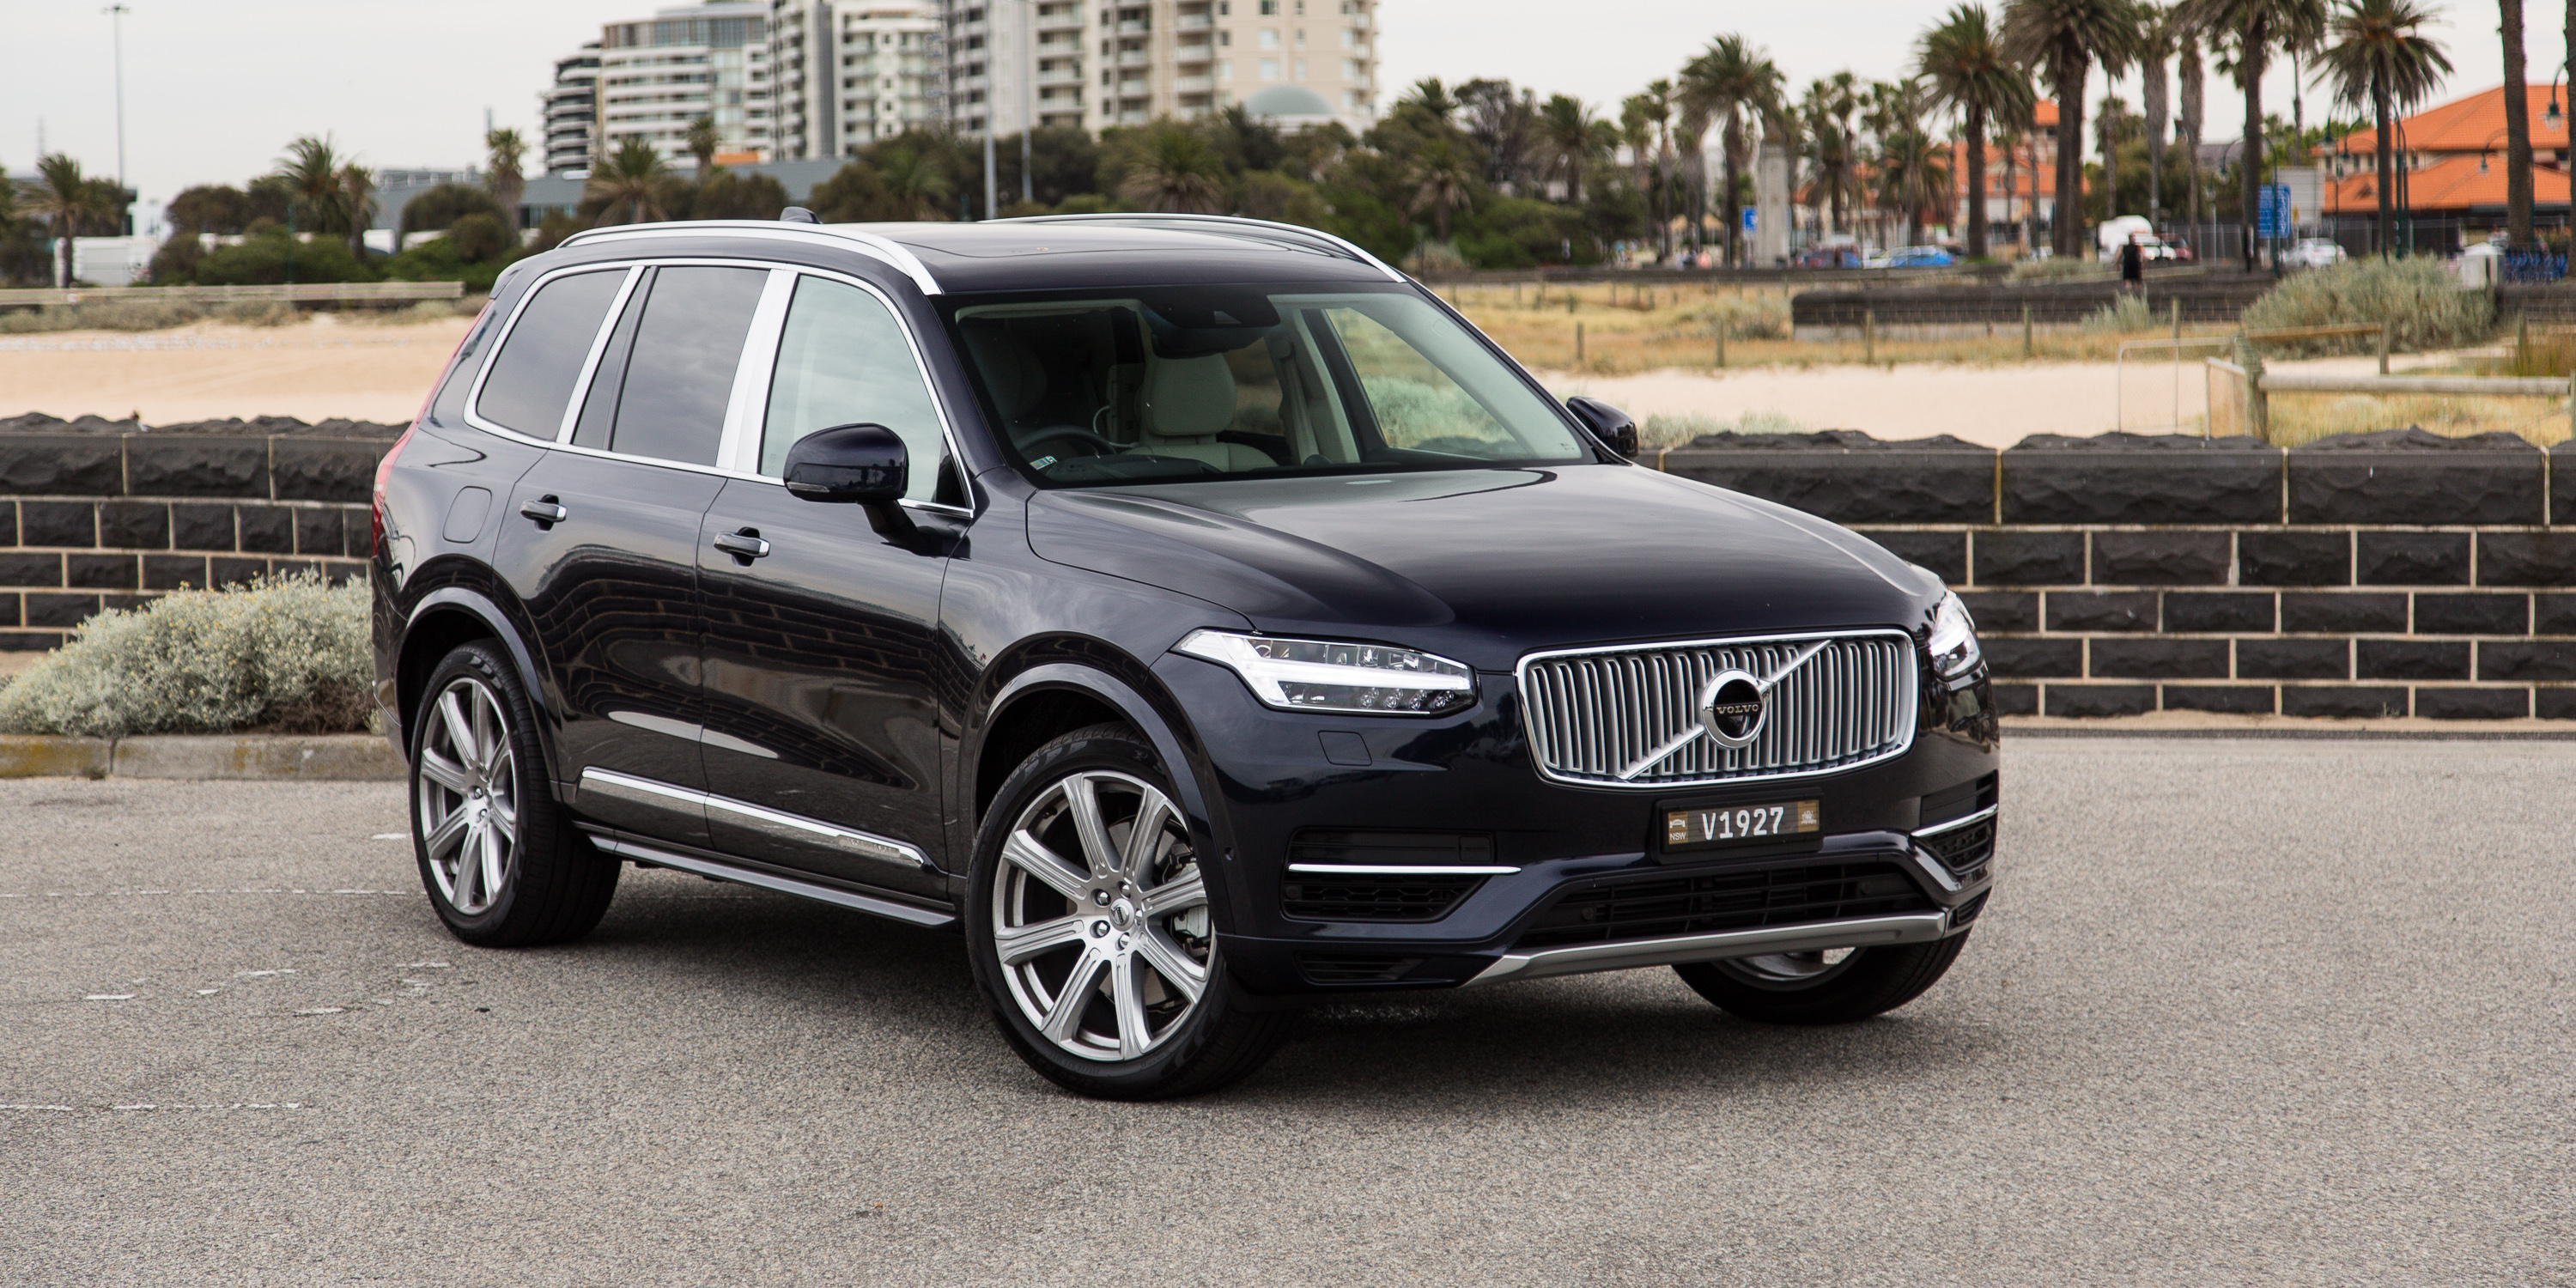 2017 Volvo XC90 Excellence review CarAdvice